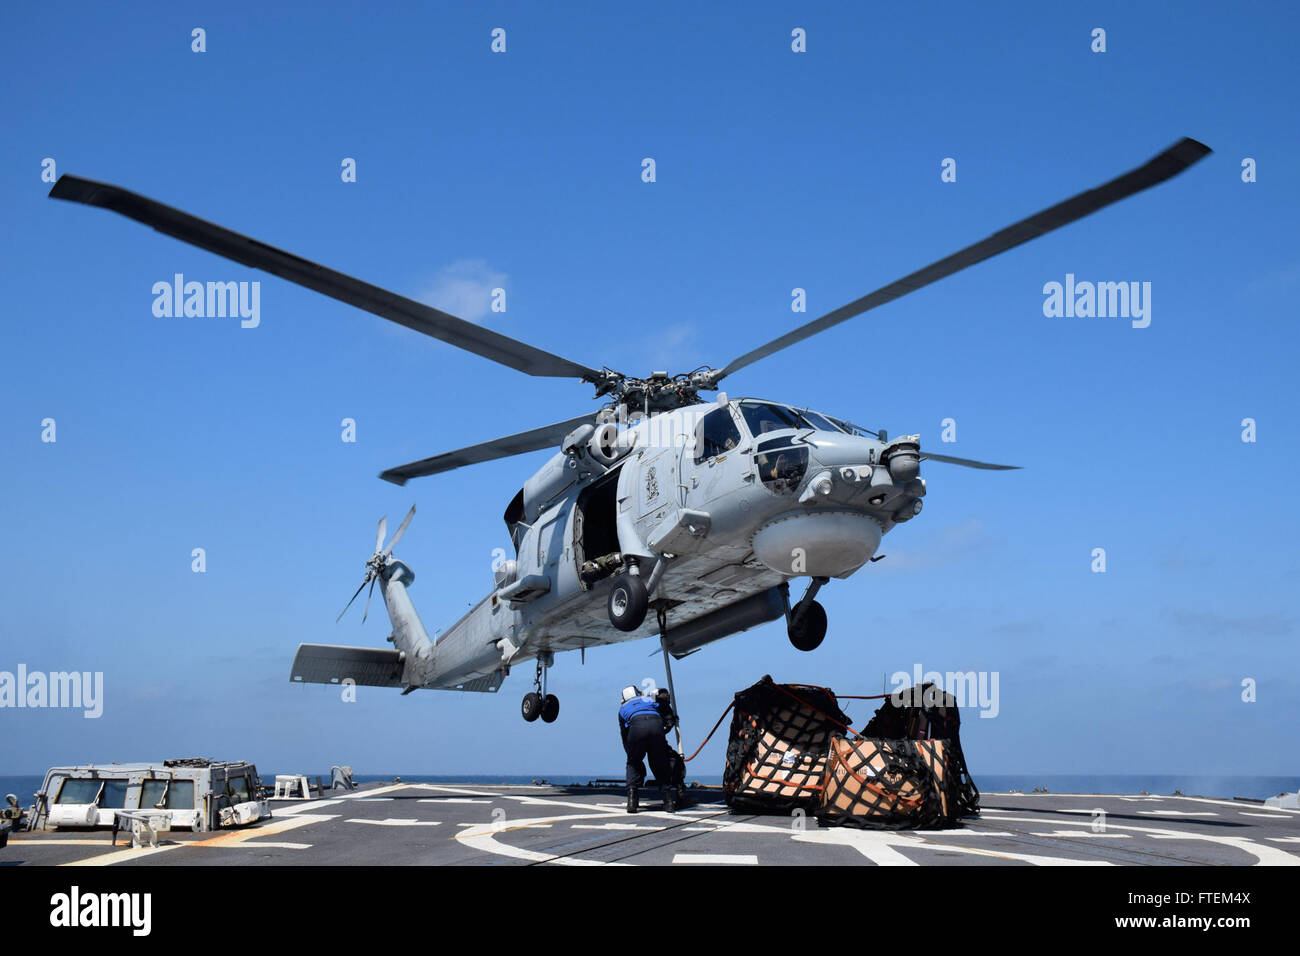 HORN OF AFRICA (Feb. 23, 2015) Flight deck crew members aboard USS Oscar Austin (DDG 79) attach supplies to an SH-60F Seahawk during a vertical replenishment with the Royal Australian navy ship HMAS Success (OR 304)Feb. 23, 2015. Oscar Austin, an Arleigh Burke-class guided-missile destroyer, homeported in Norfolk, is conducting naval operations in the U.S. 6th Fleet area of operations in support of U.S. national security interests in Europe and Africa. Stock Photo